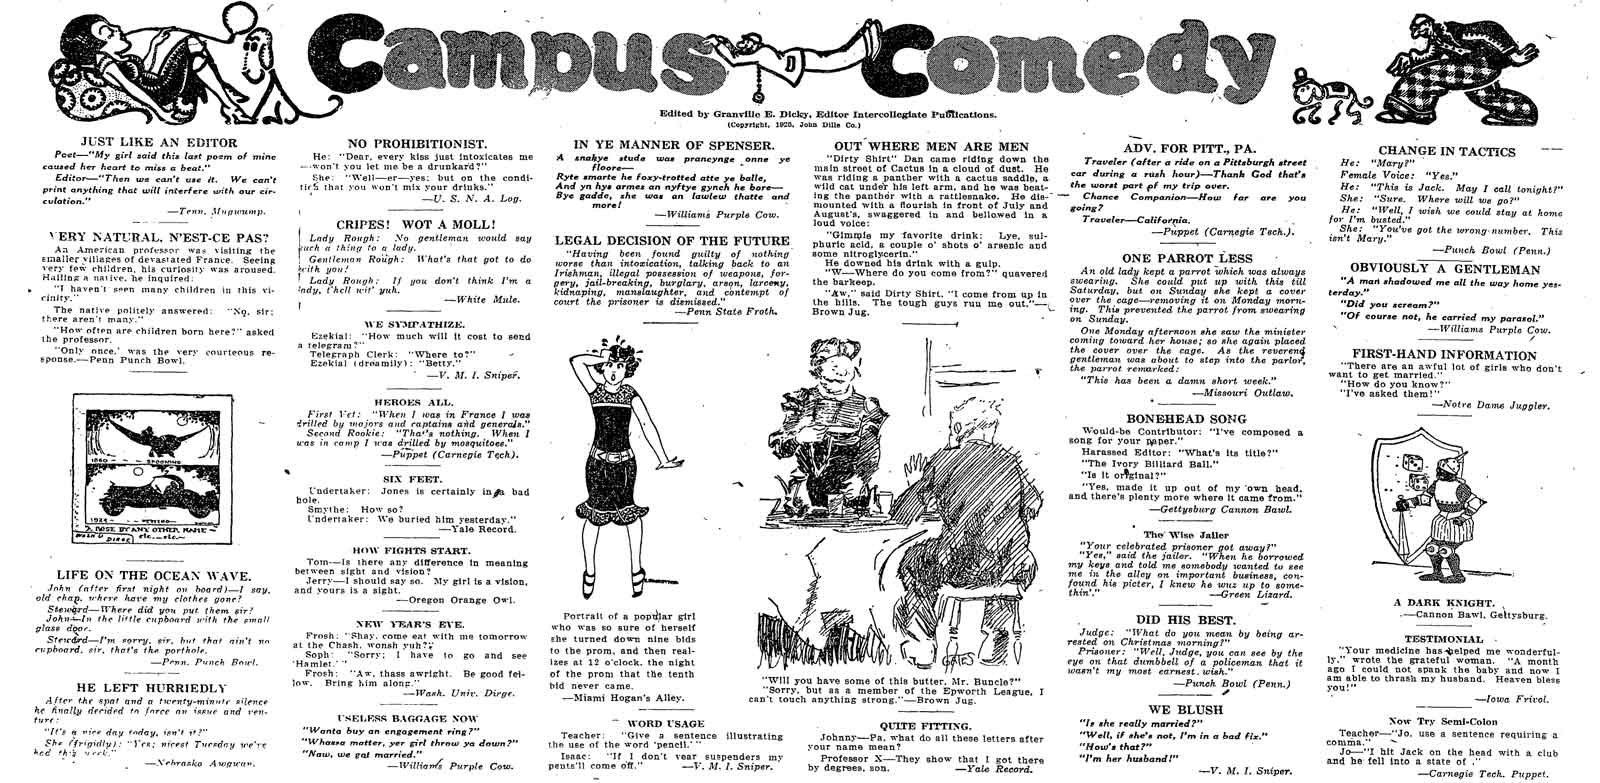 image campuscomedy250816-jpg